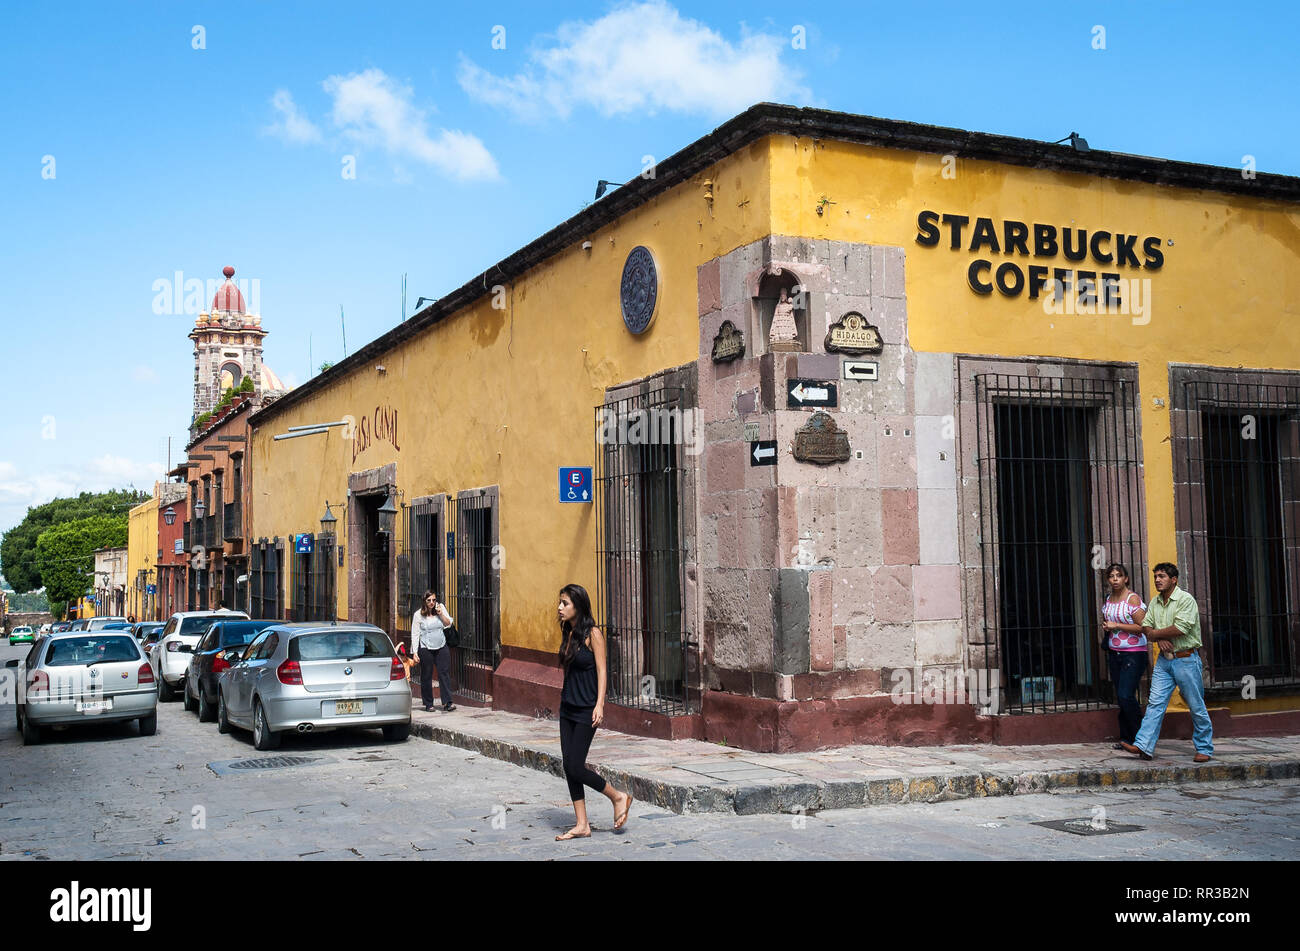 Mexico San Miguel de Allende Starbucks store in an old building on the corner of a cobblestone street in this picturesque town. Exterior view. Stock Photo